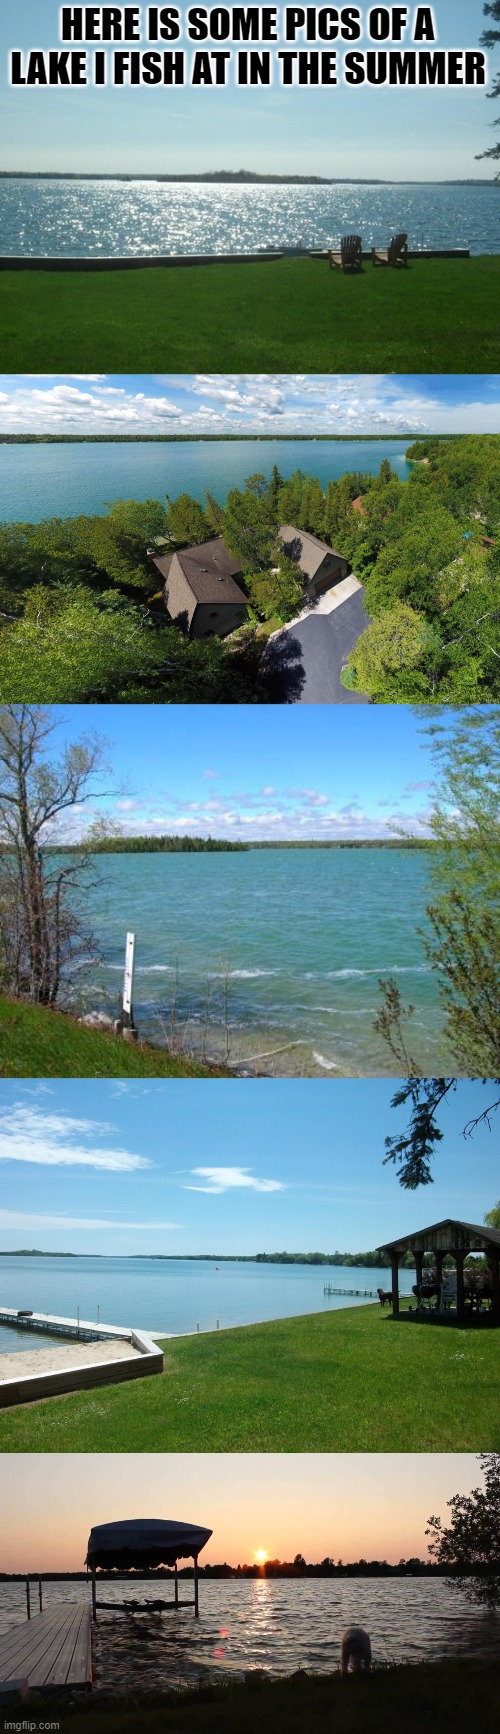 lake |  HERE IS SOME PICS OF A LAKE I FISH AT IN THE SUMMER | made w/ Imgflip meme maker